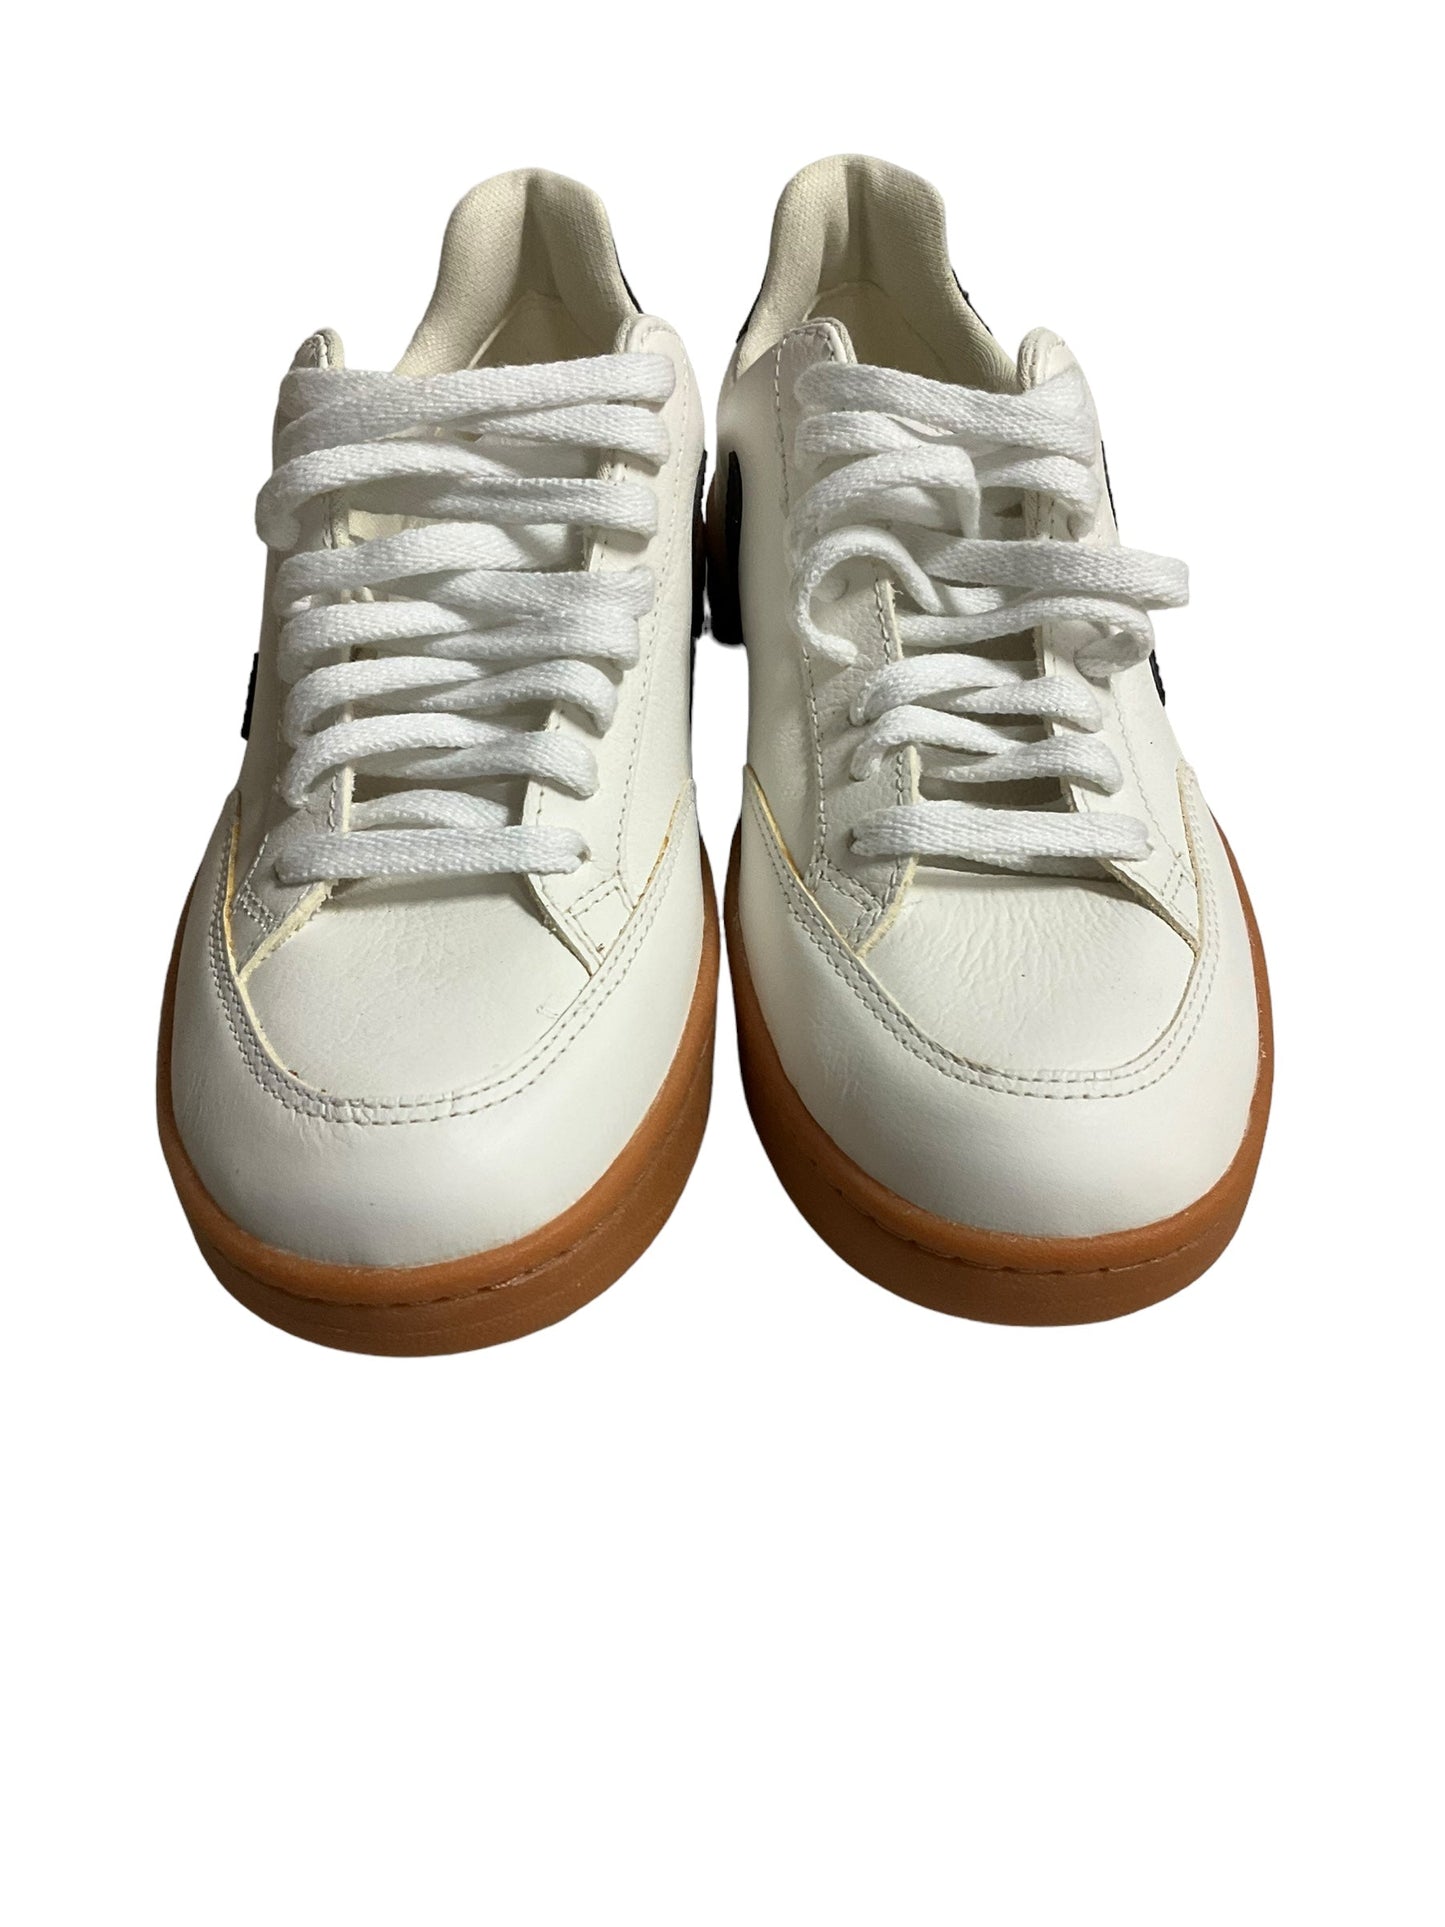 White Shoes Sneakers Veja, Size 7